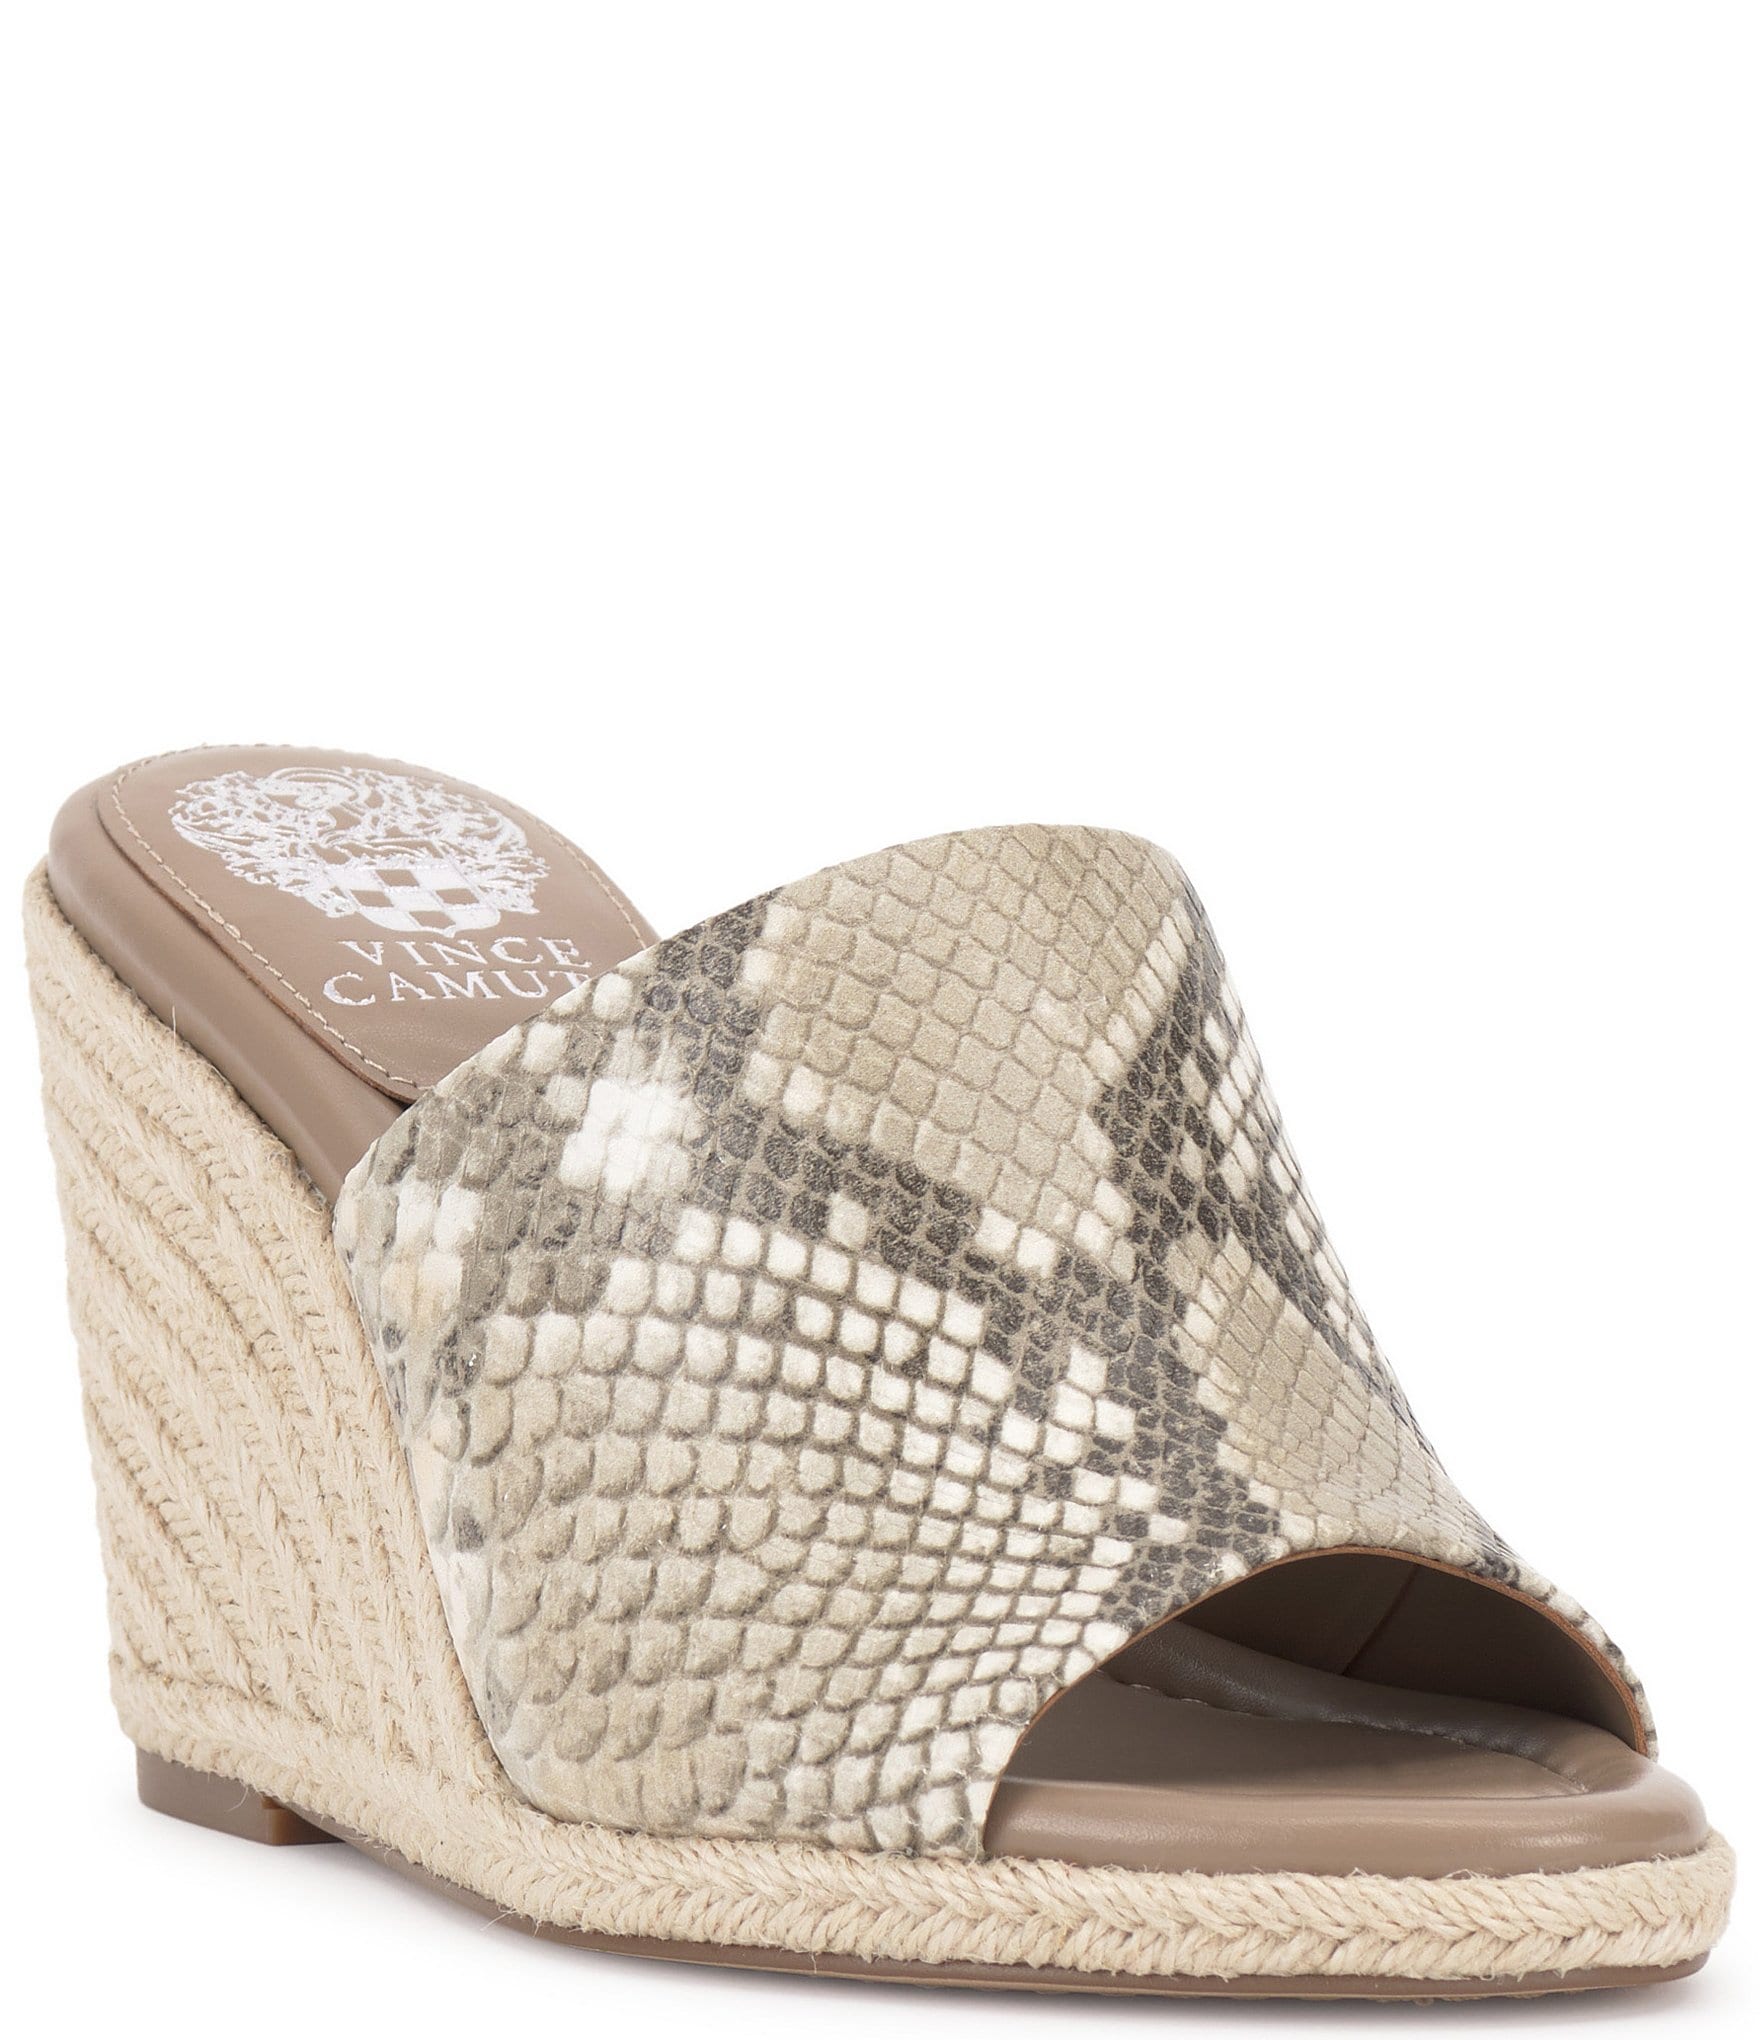 Vince Camuto Fayla Snake Embossed Leather Wedge Sandals | Dillard's